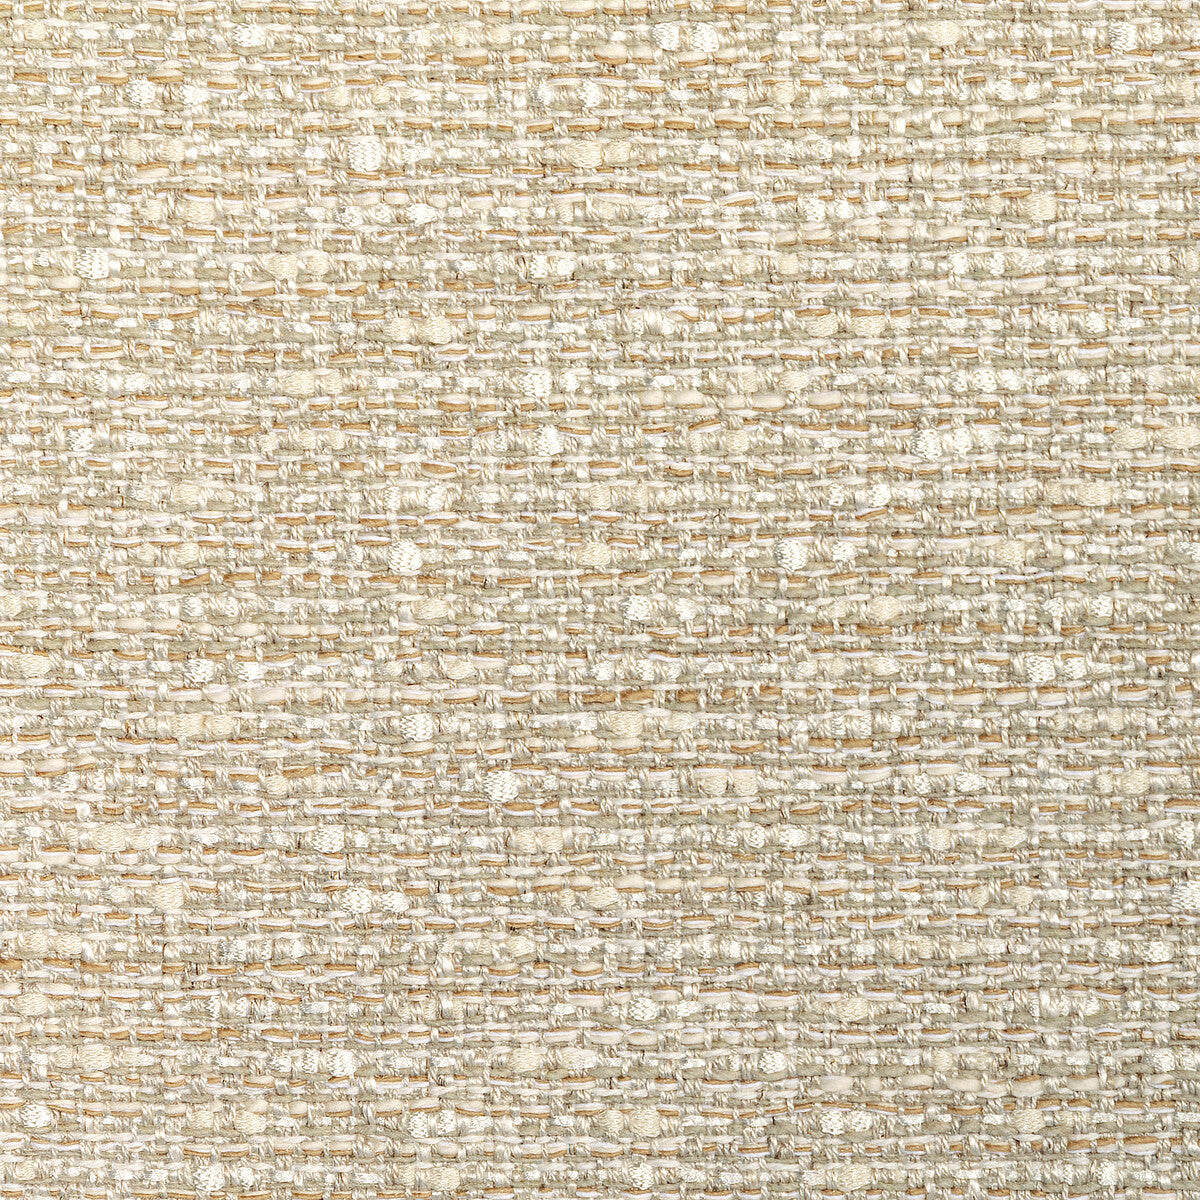 Naturalist fabric in white sand color - pattern 36104.16.0 - by Kravet Couture in the Luxury Textures II collection